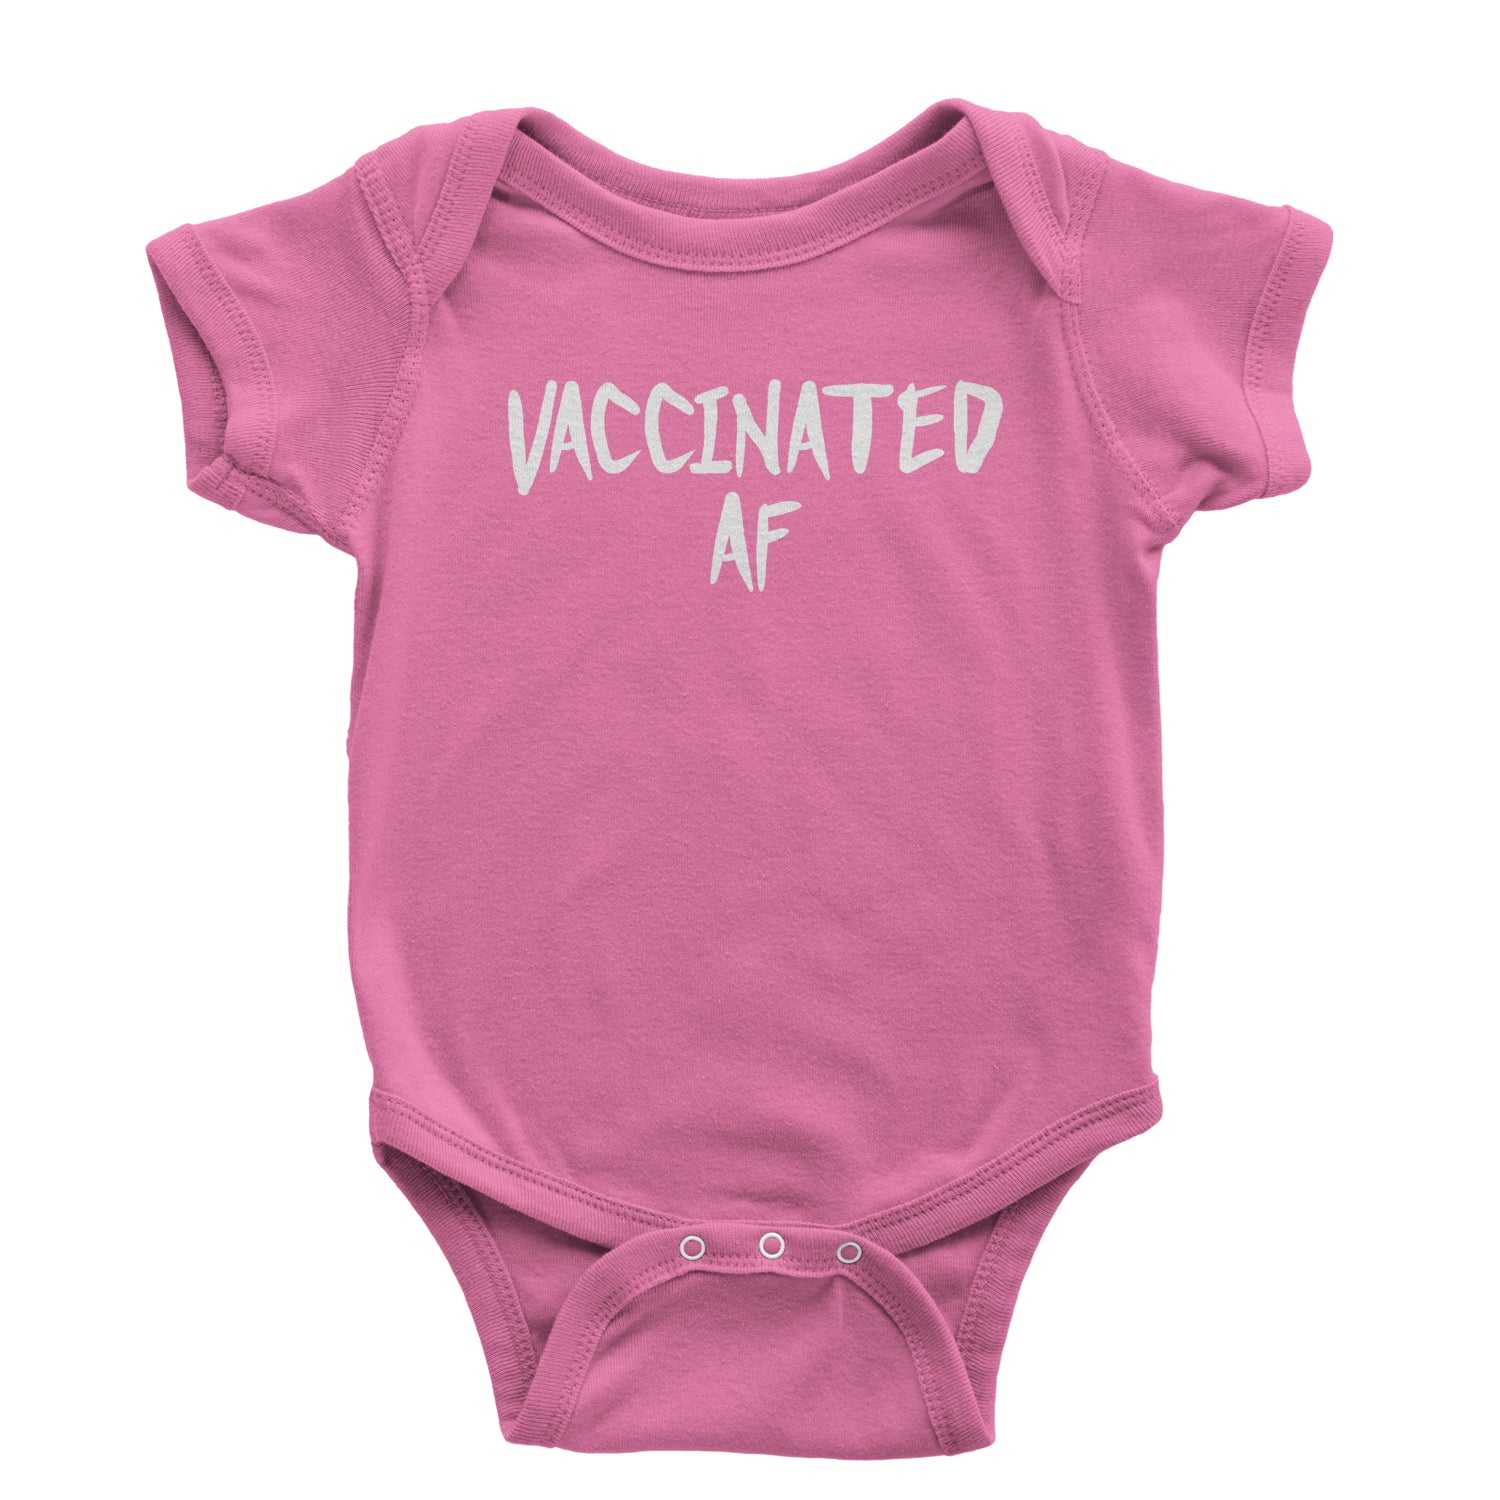 Vaccinated AF Pro Vaccine Funny Vaccination Health Infant One-Piece Romper Bodysuit moderna, pfizer, vaccine, vax, vaxx by Expression Tees